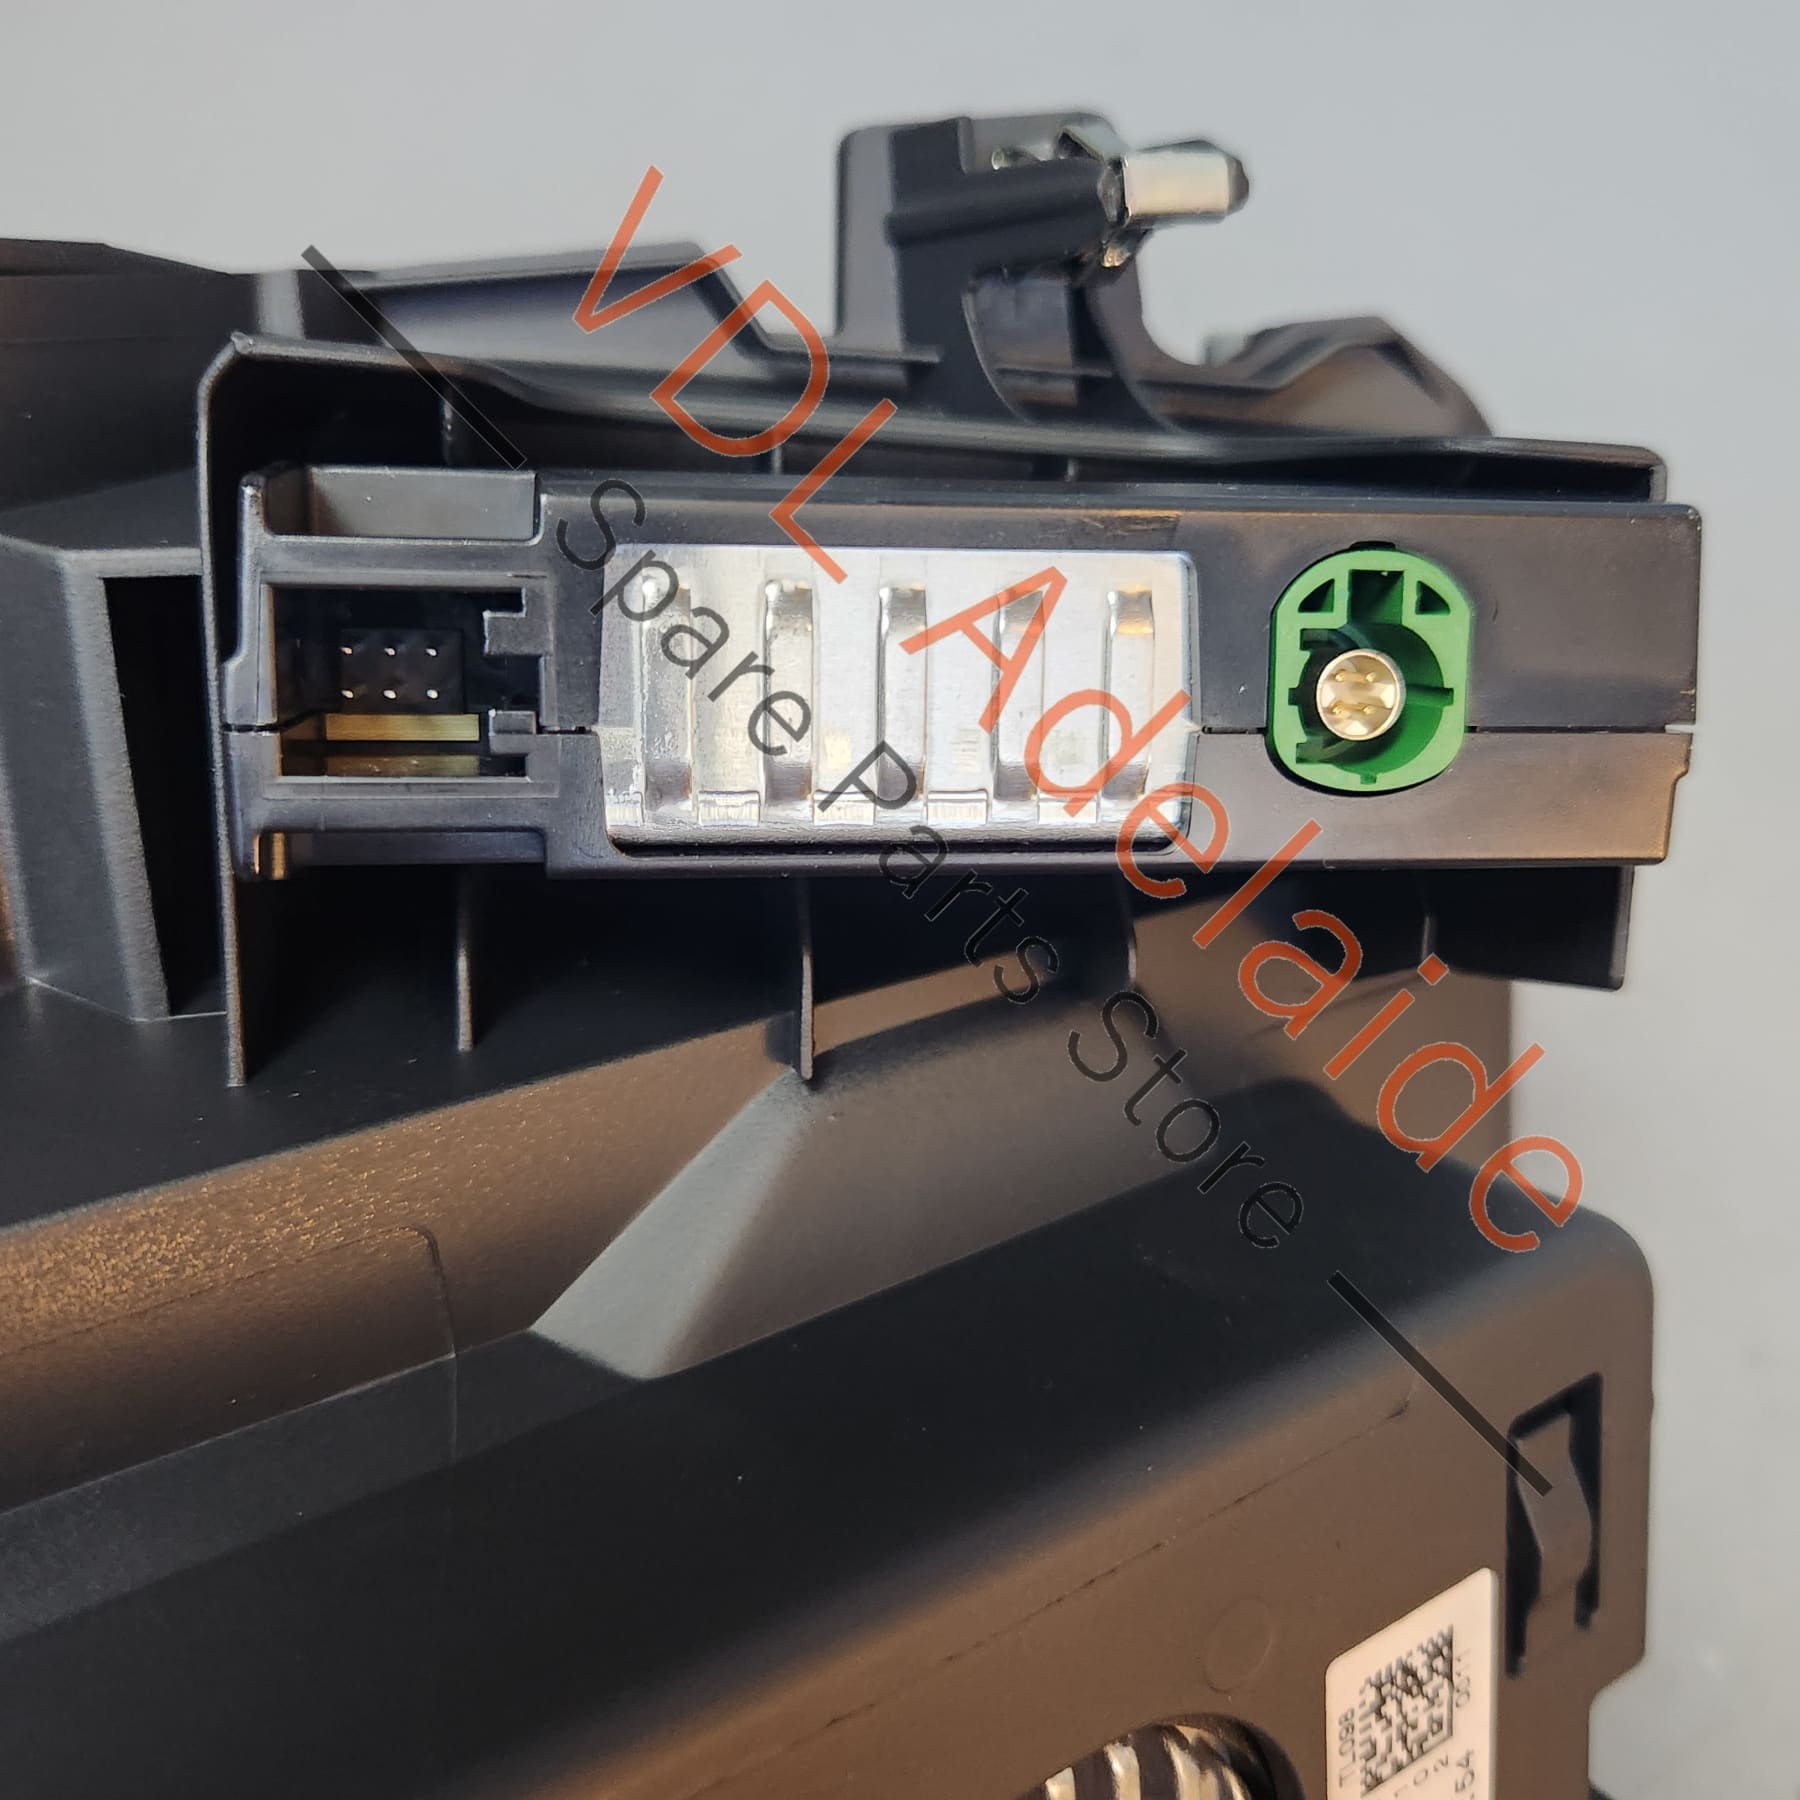 83A035736    Audi RSQ3 F3 Double USB Port & Cordless Phone Charging Dock 83A035736